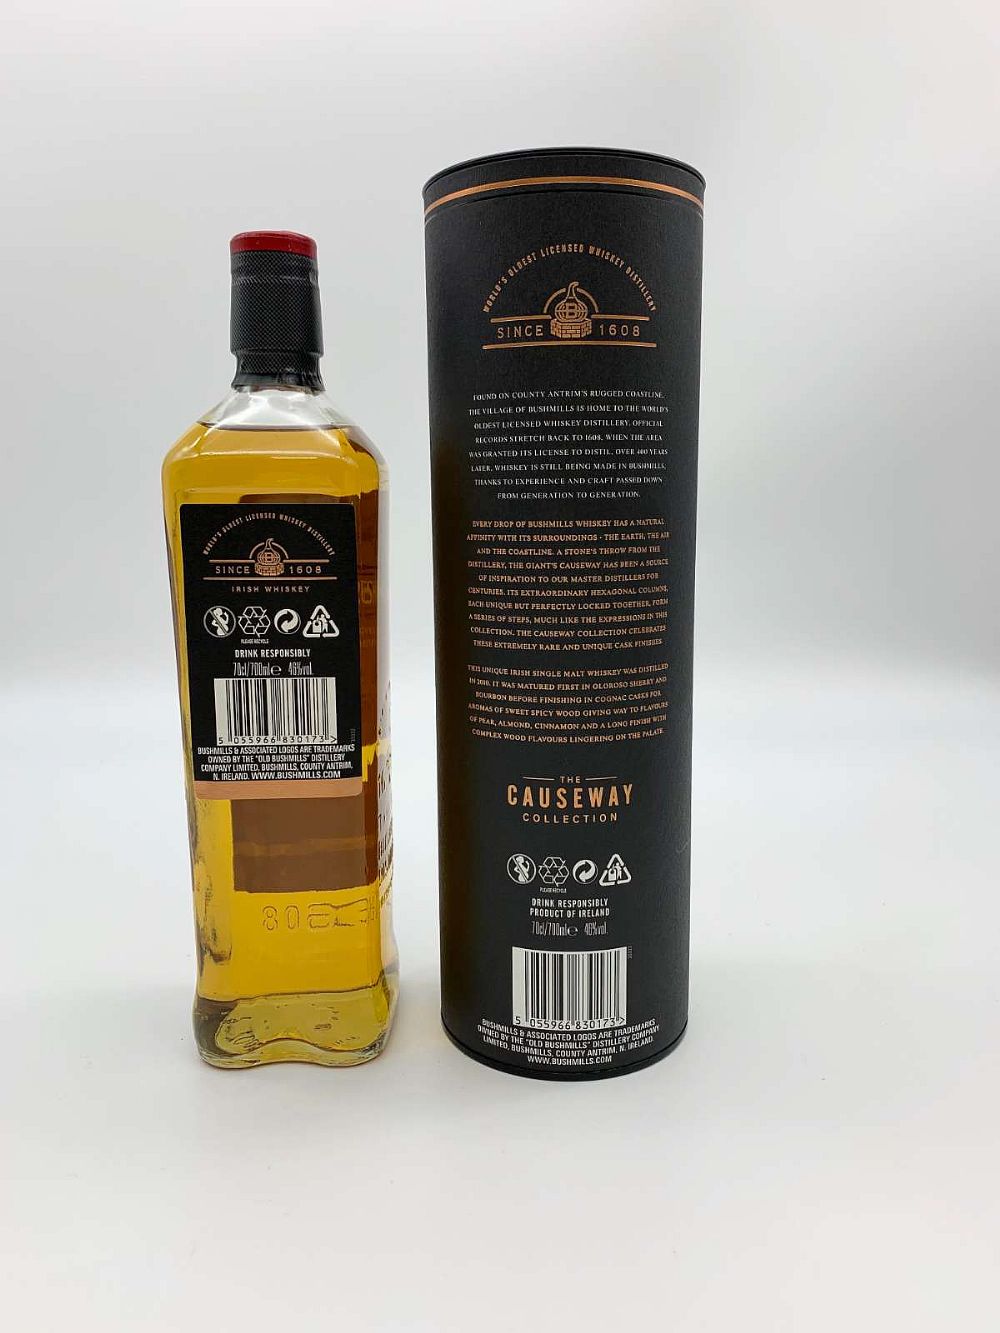 Bushmills Causeway Collection Cognac Cask Finish, 10 year old